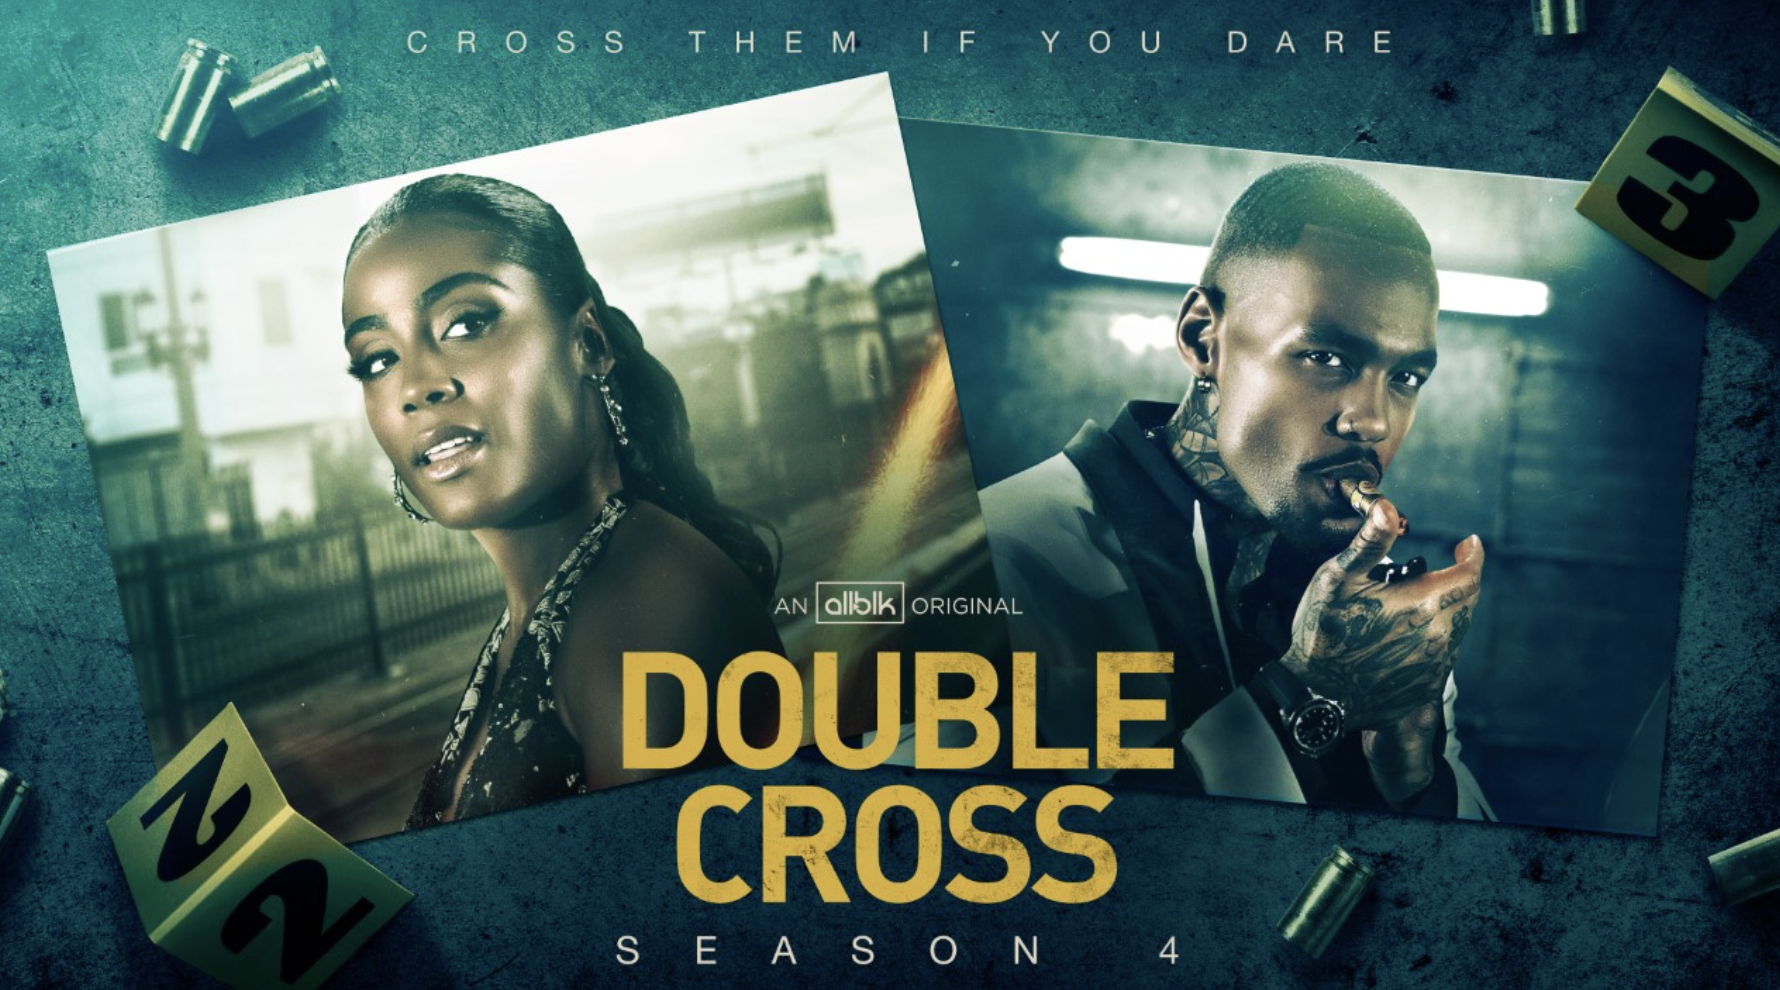 ‘Double Cross’ Exclusive Clip: Cintron’s Dead & Erica’s Shocked—‘I Can’t Believe This!’